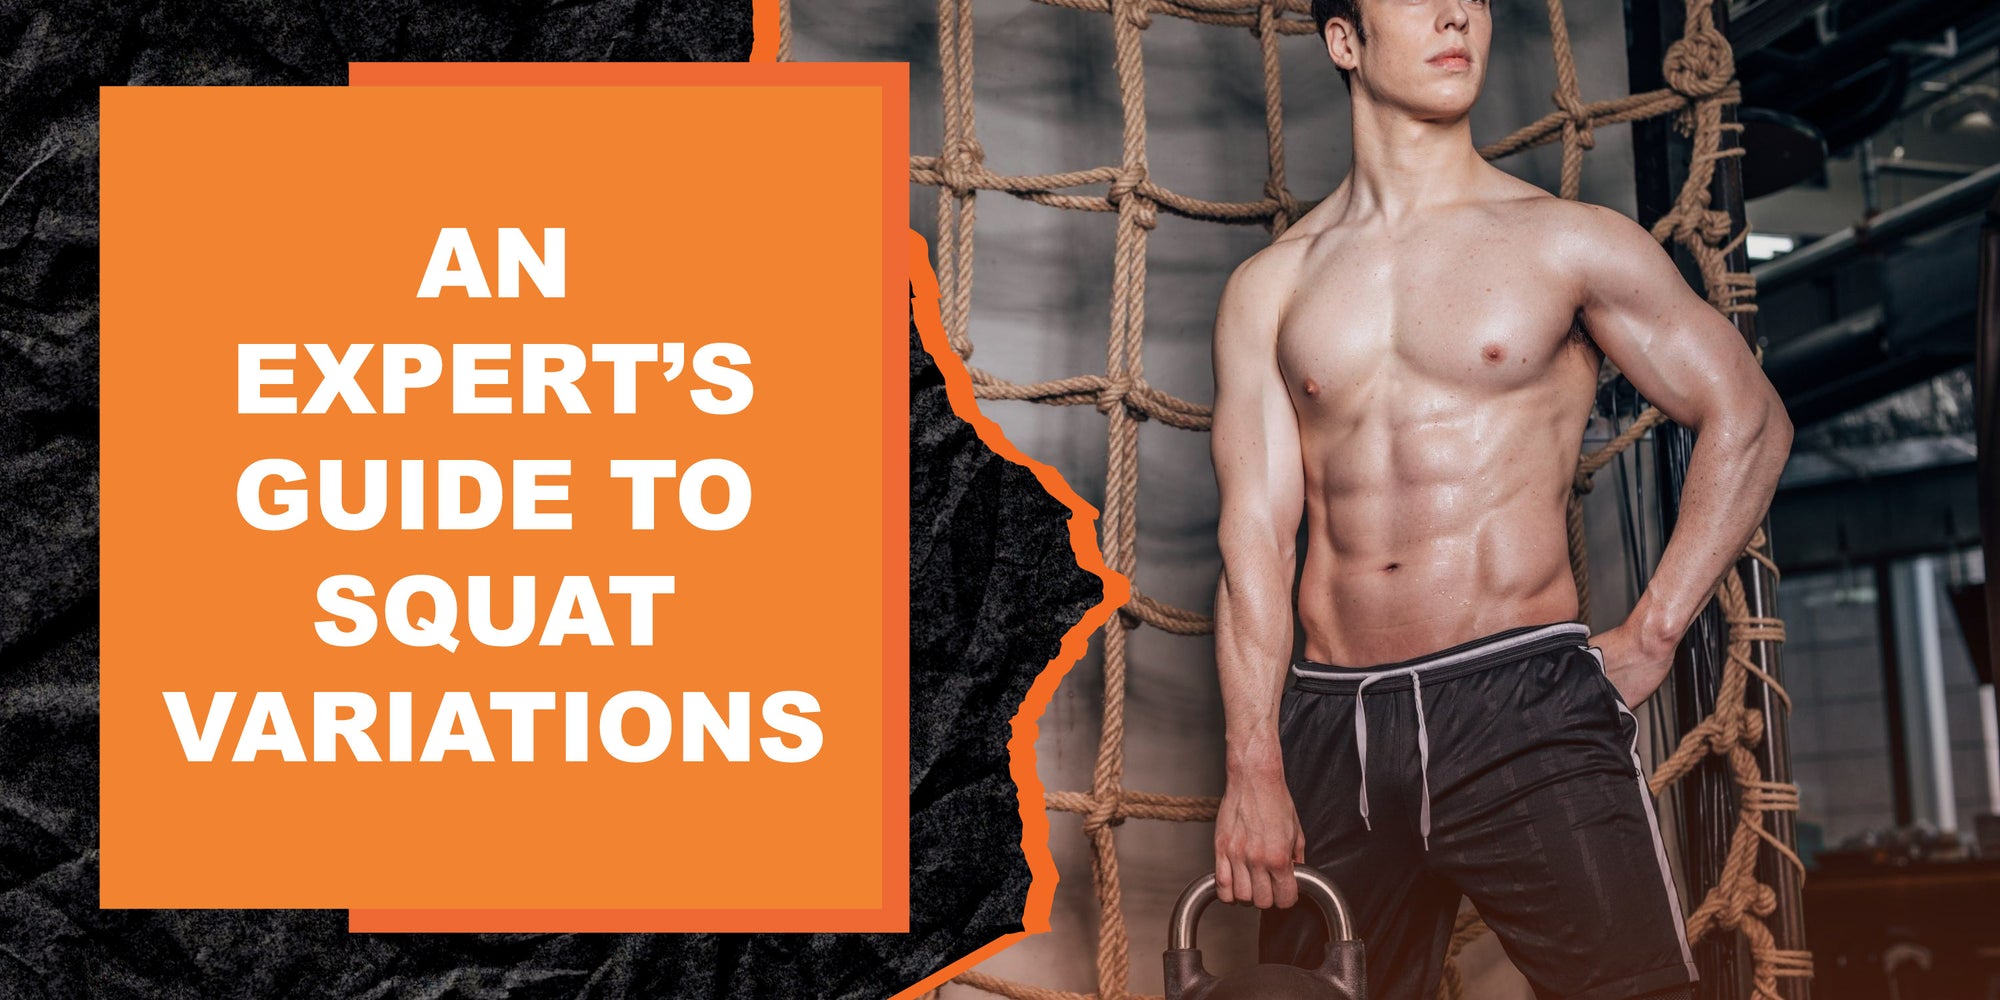 An Expert’s Guide to Squat Variations